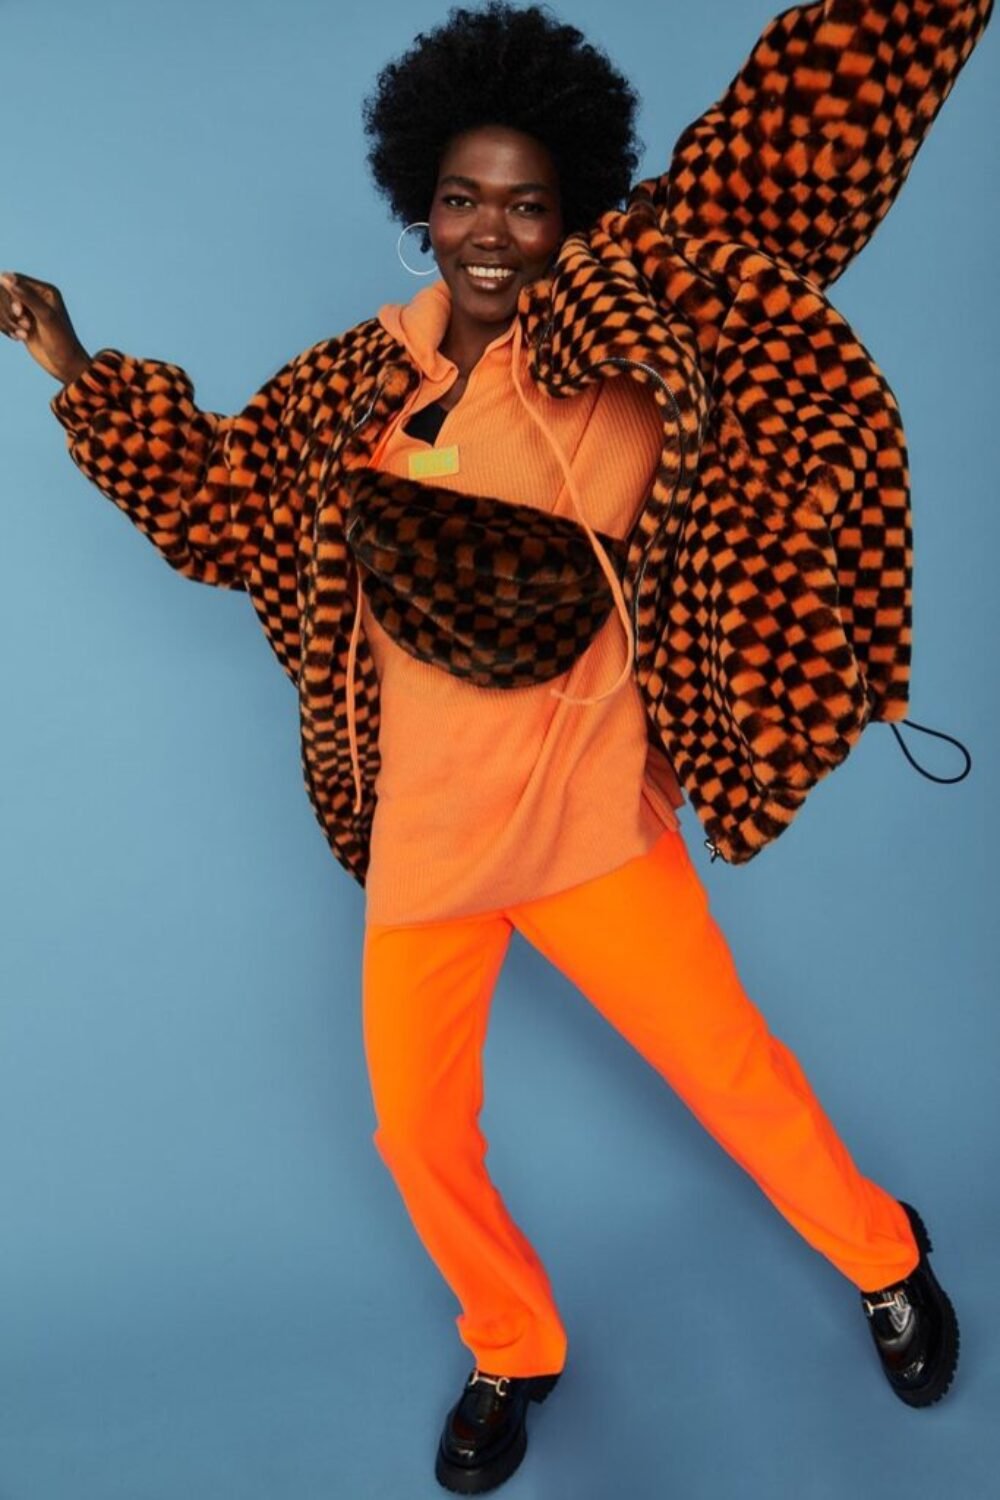 Shop Lux Orange oversized Checkered Zip Coat and women's luxury and designer clothes at www.lux-apparel.co.uk